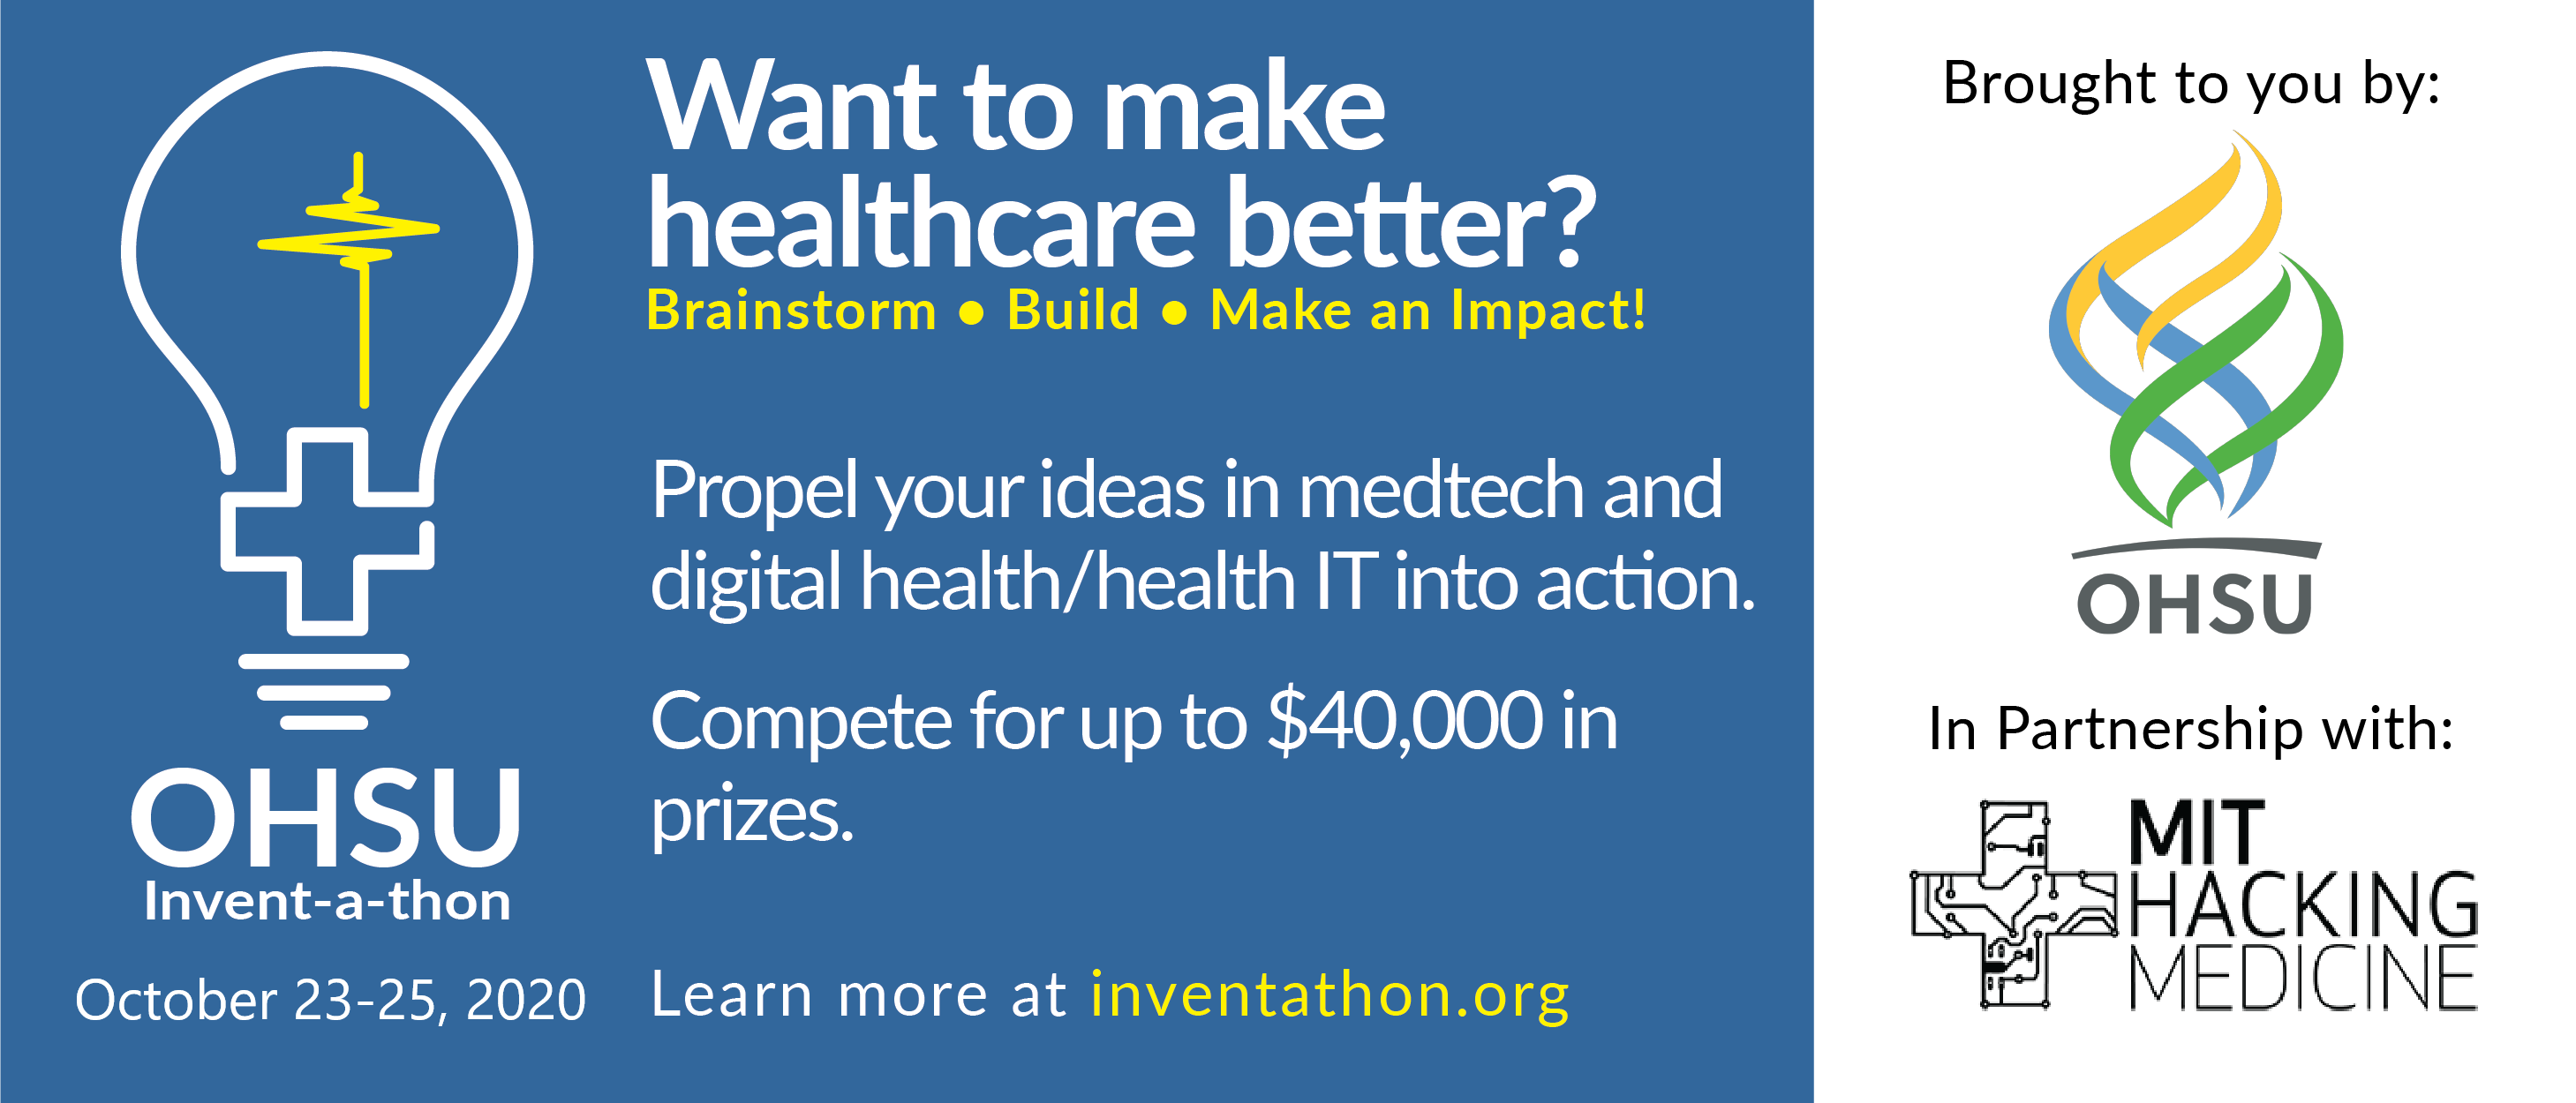 Promo banner for the OHSU Invent-a-thon happening October 23-25, 2020. Learn more at inventathon.org